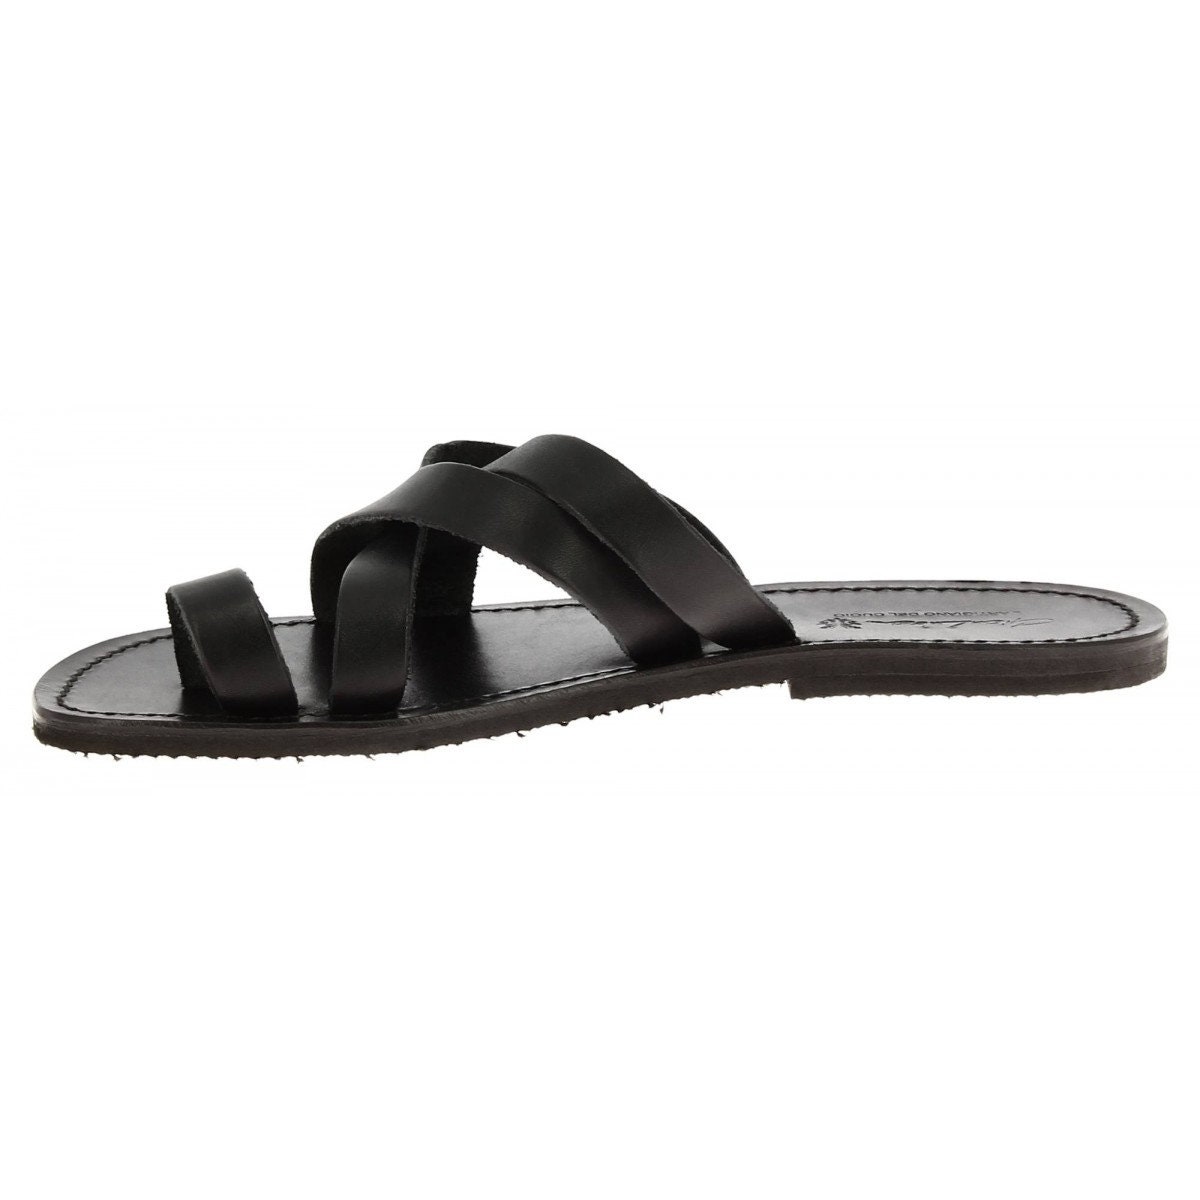 Men's Black Leather Thong Sandals Handmade in Italy - Etsy